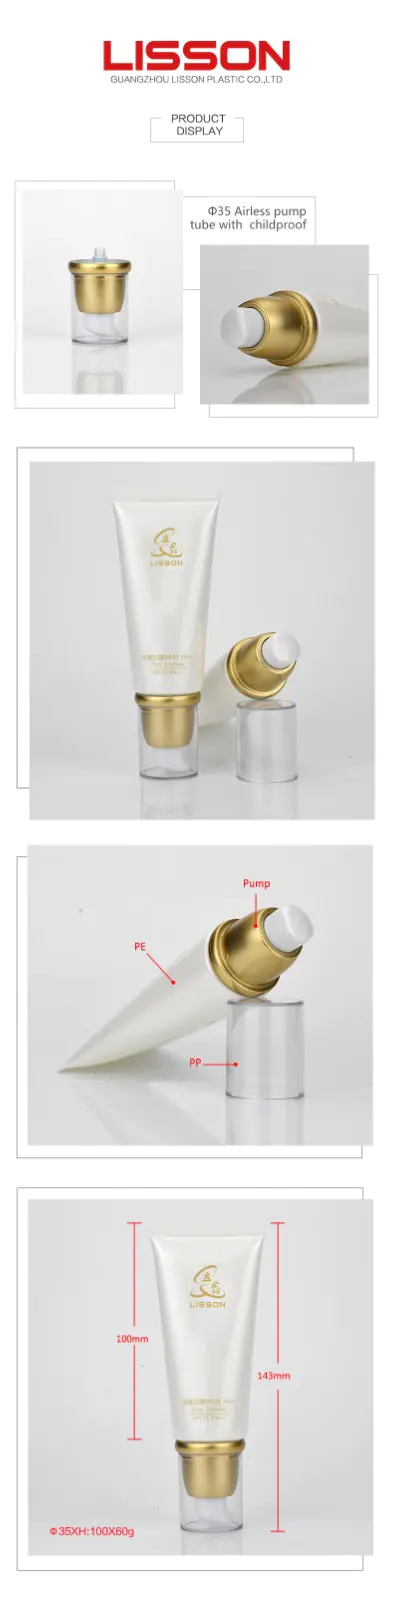 Lisson cosmetic airless pump tube clear for cosmetic